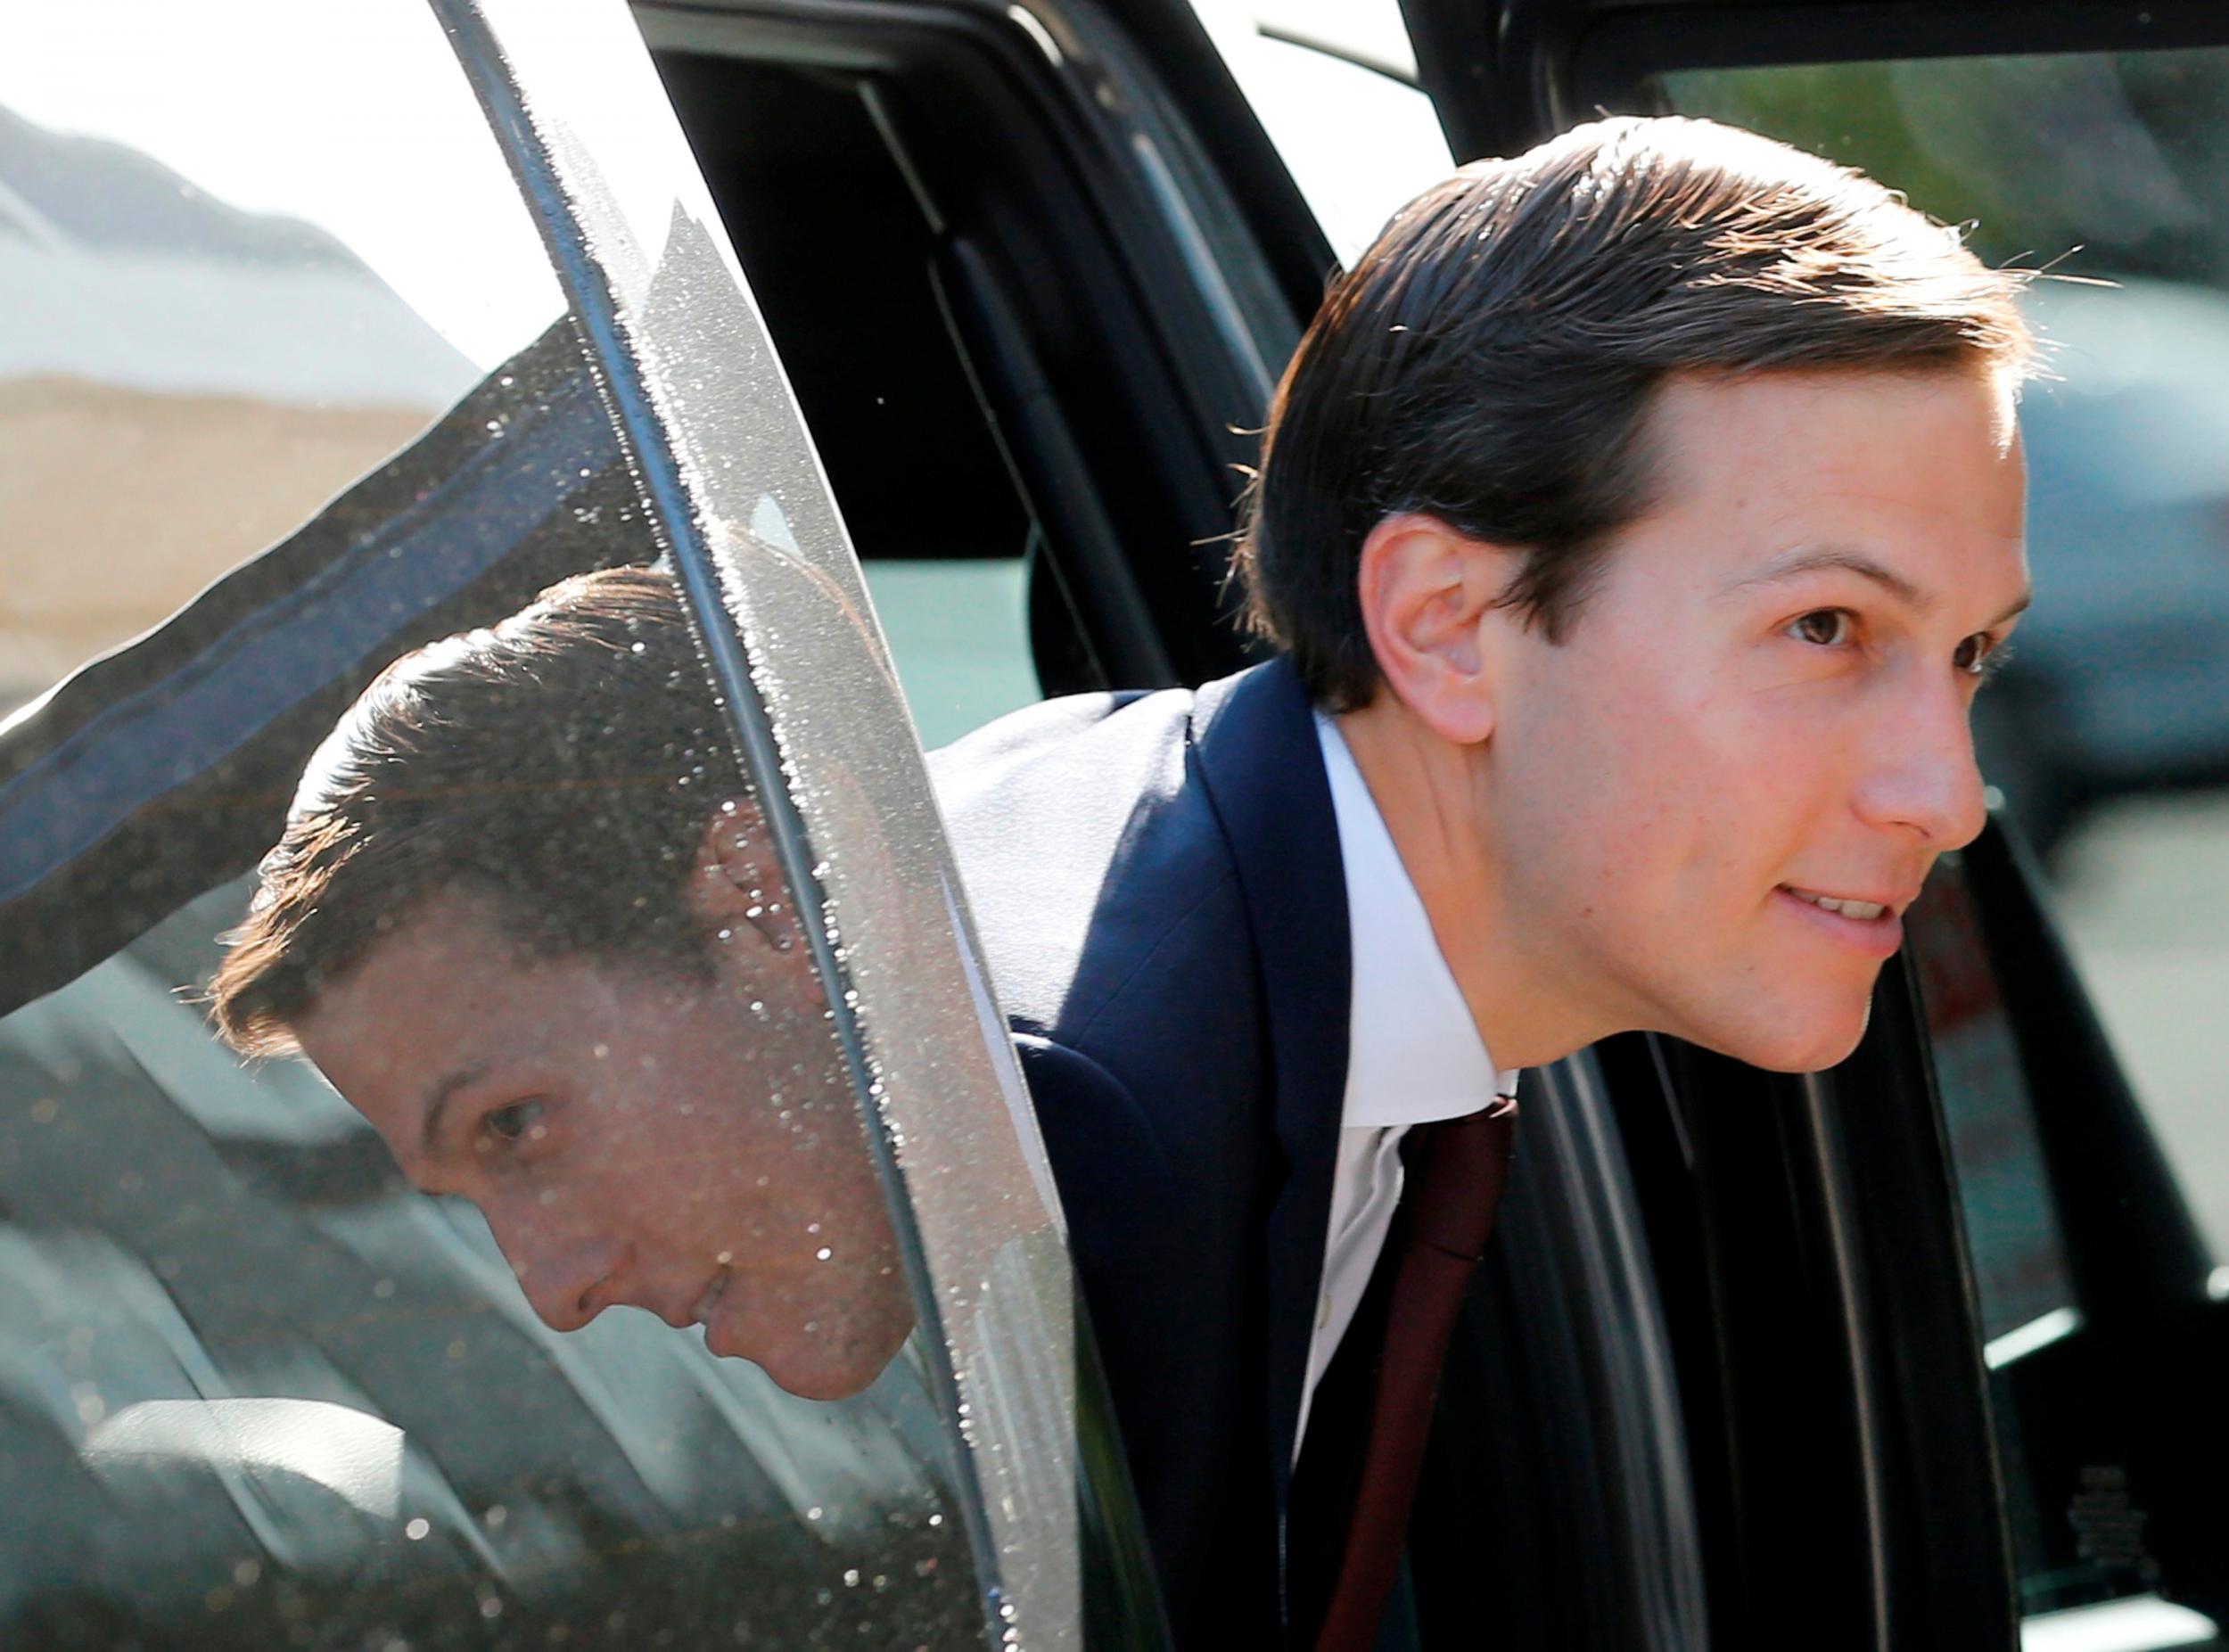 The US embassy in Egypt said that the Kushner-Shoukry meeting had not been “fixed” in the vistors' schedule